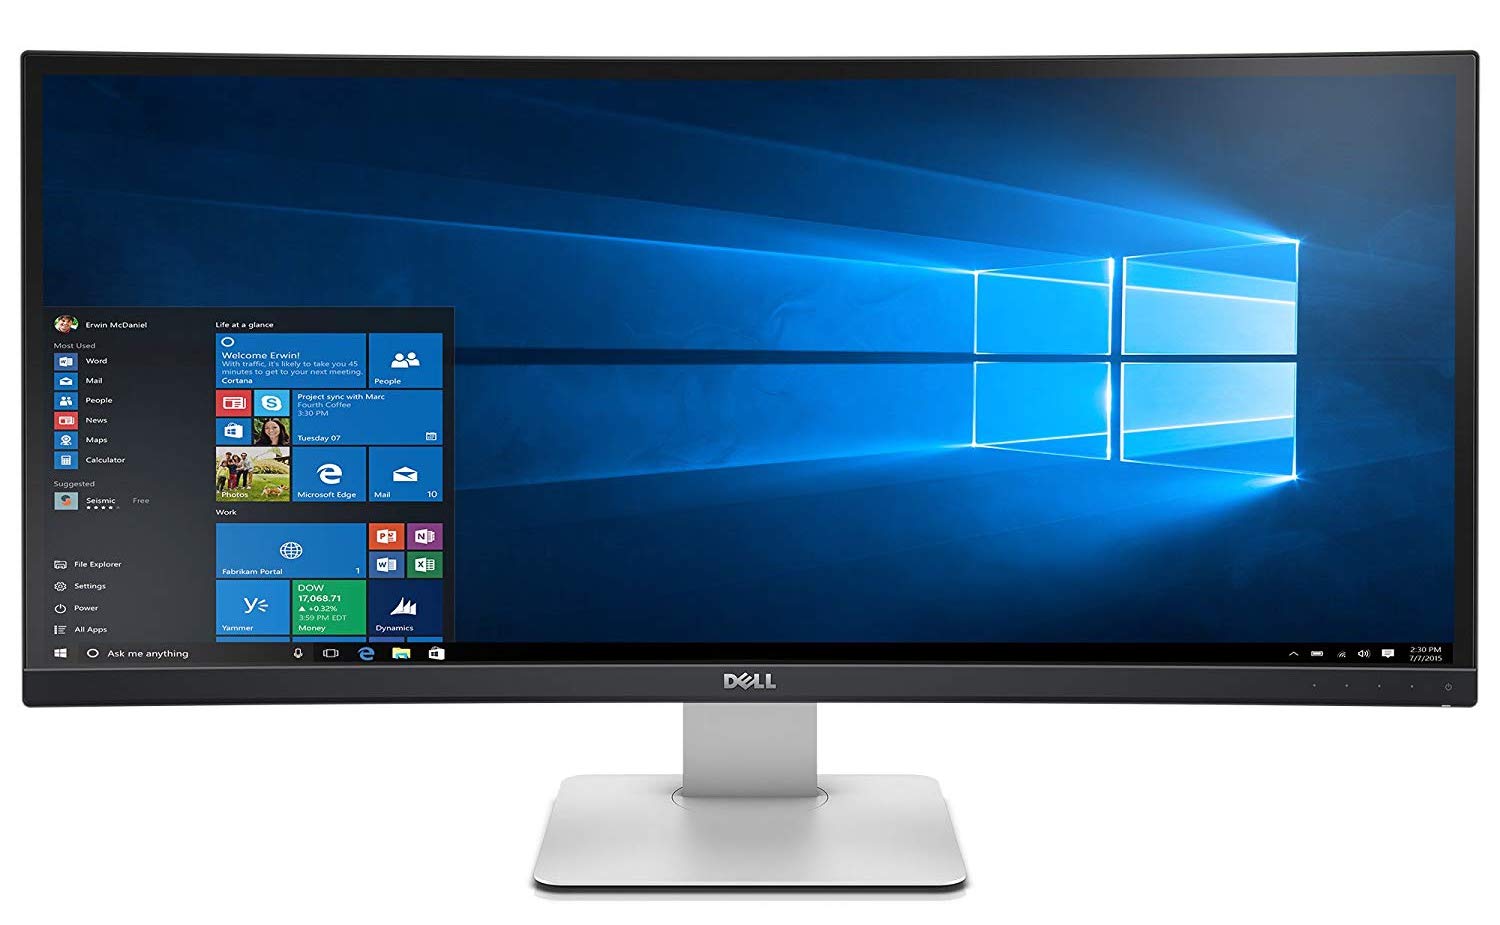 A picture of the Dell 34 inch curved 21:9 monitor that I'm drooling over